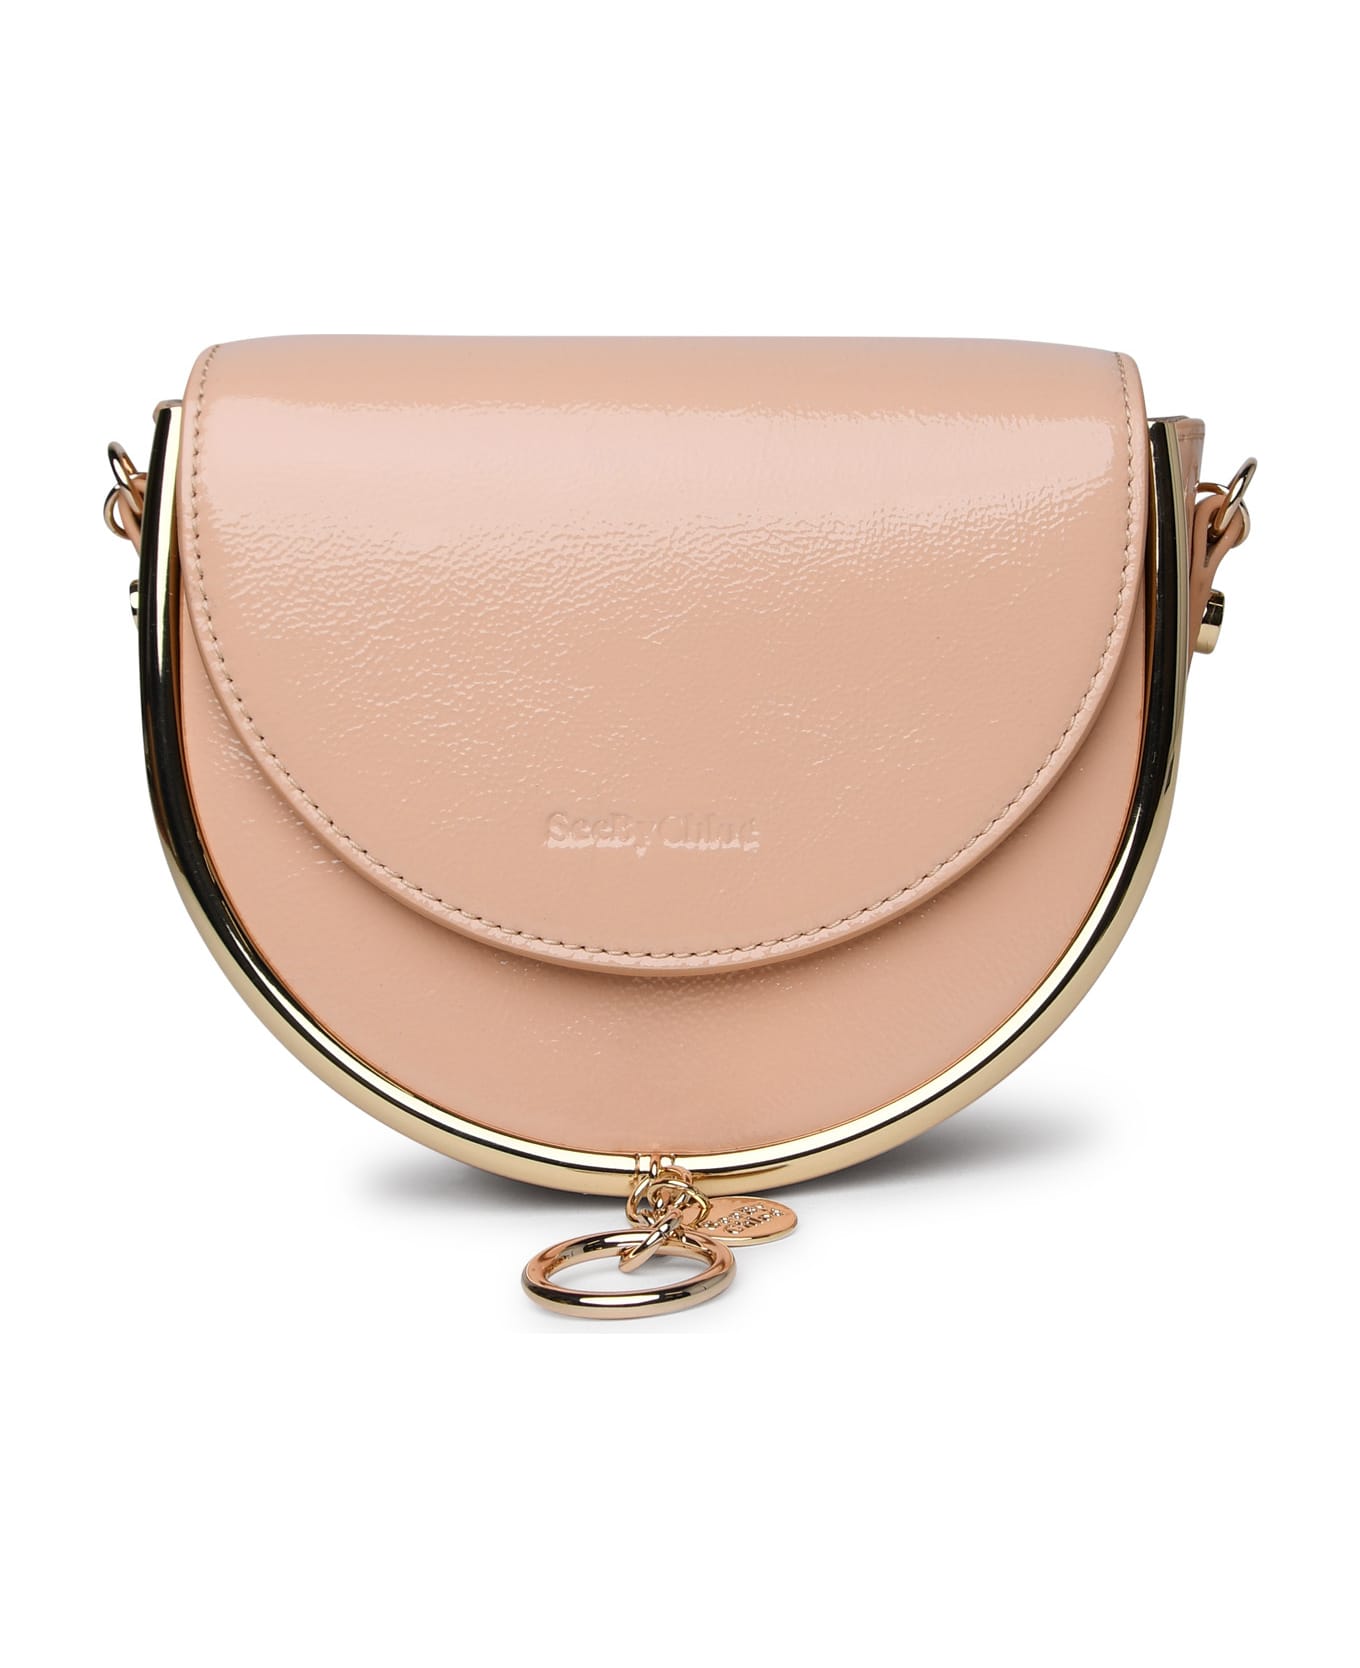 See by Chloé Pink Patent Leather Bag - Nude トートバッグ